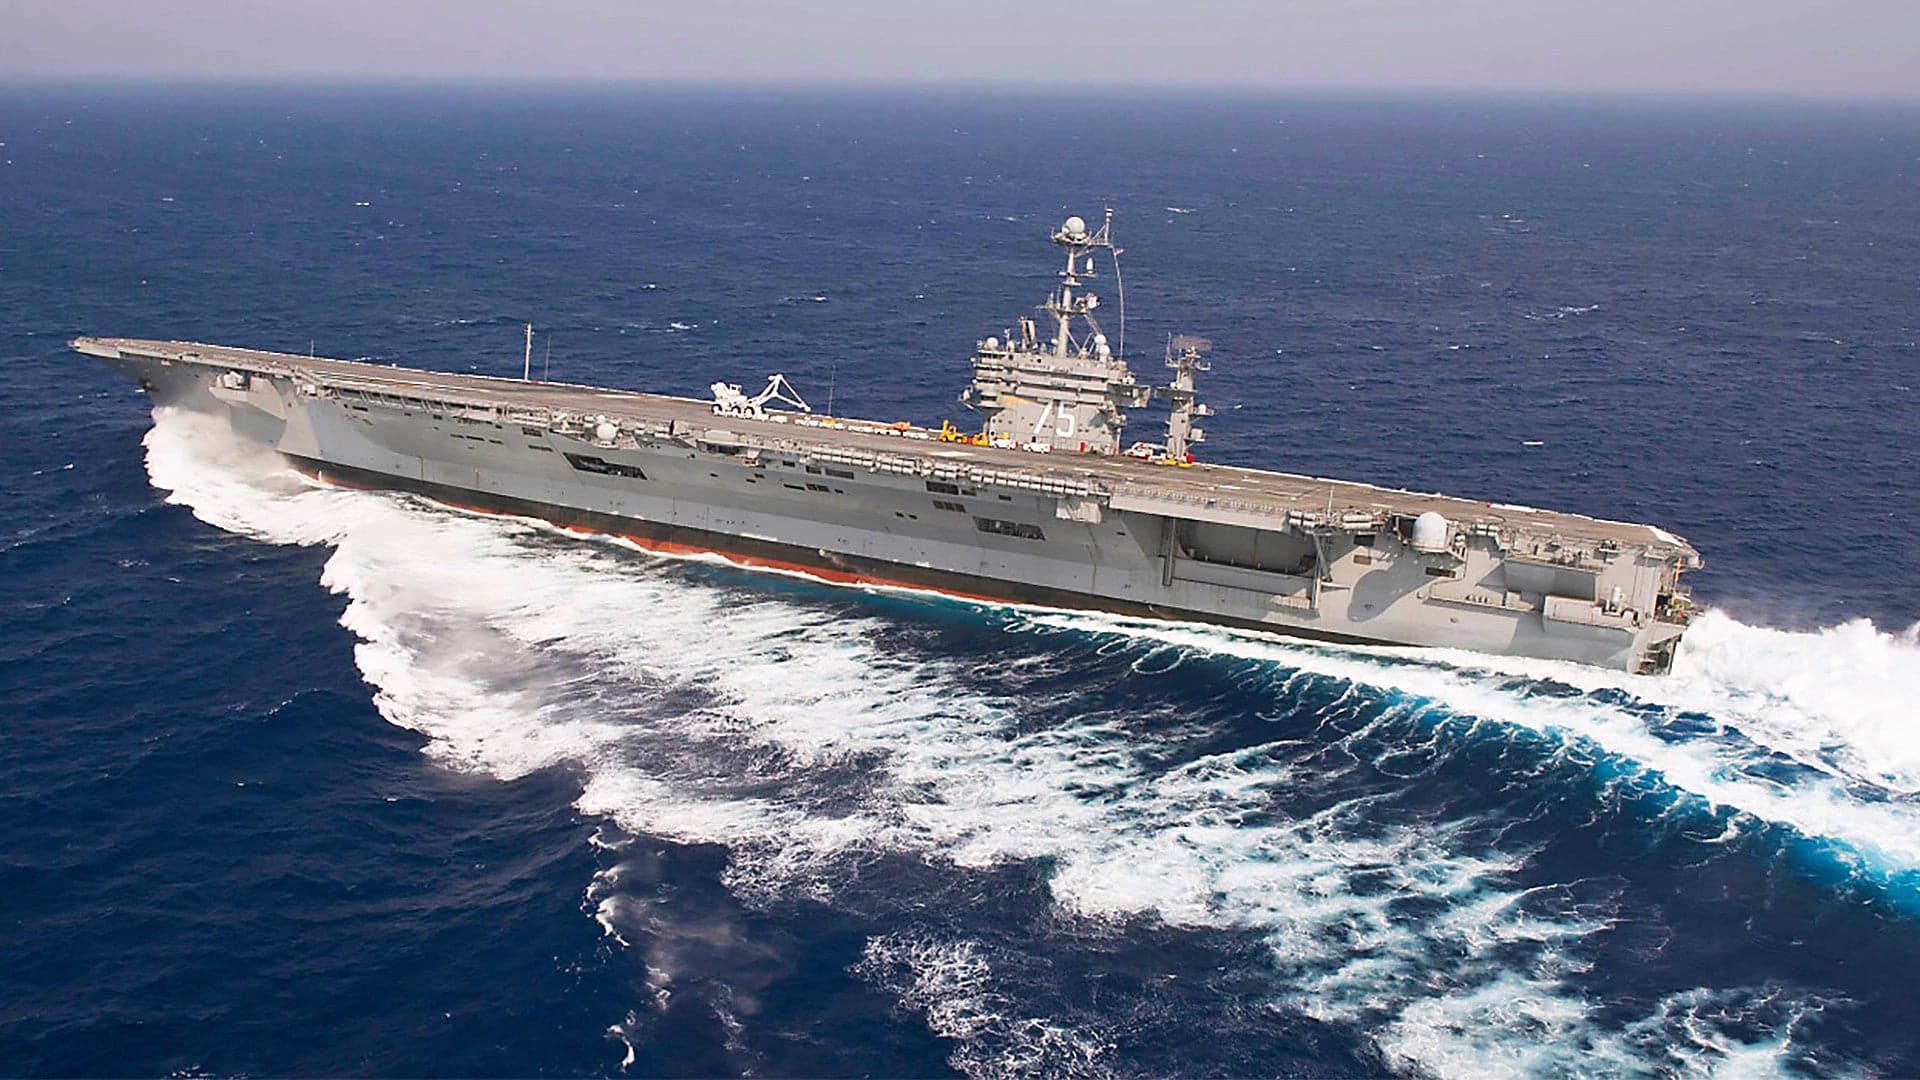 The Puzzling Case Of The Navy’s Attempt To Retire Supercarrier USS Harry S. Truman Early